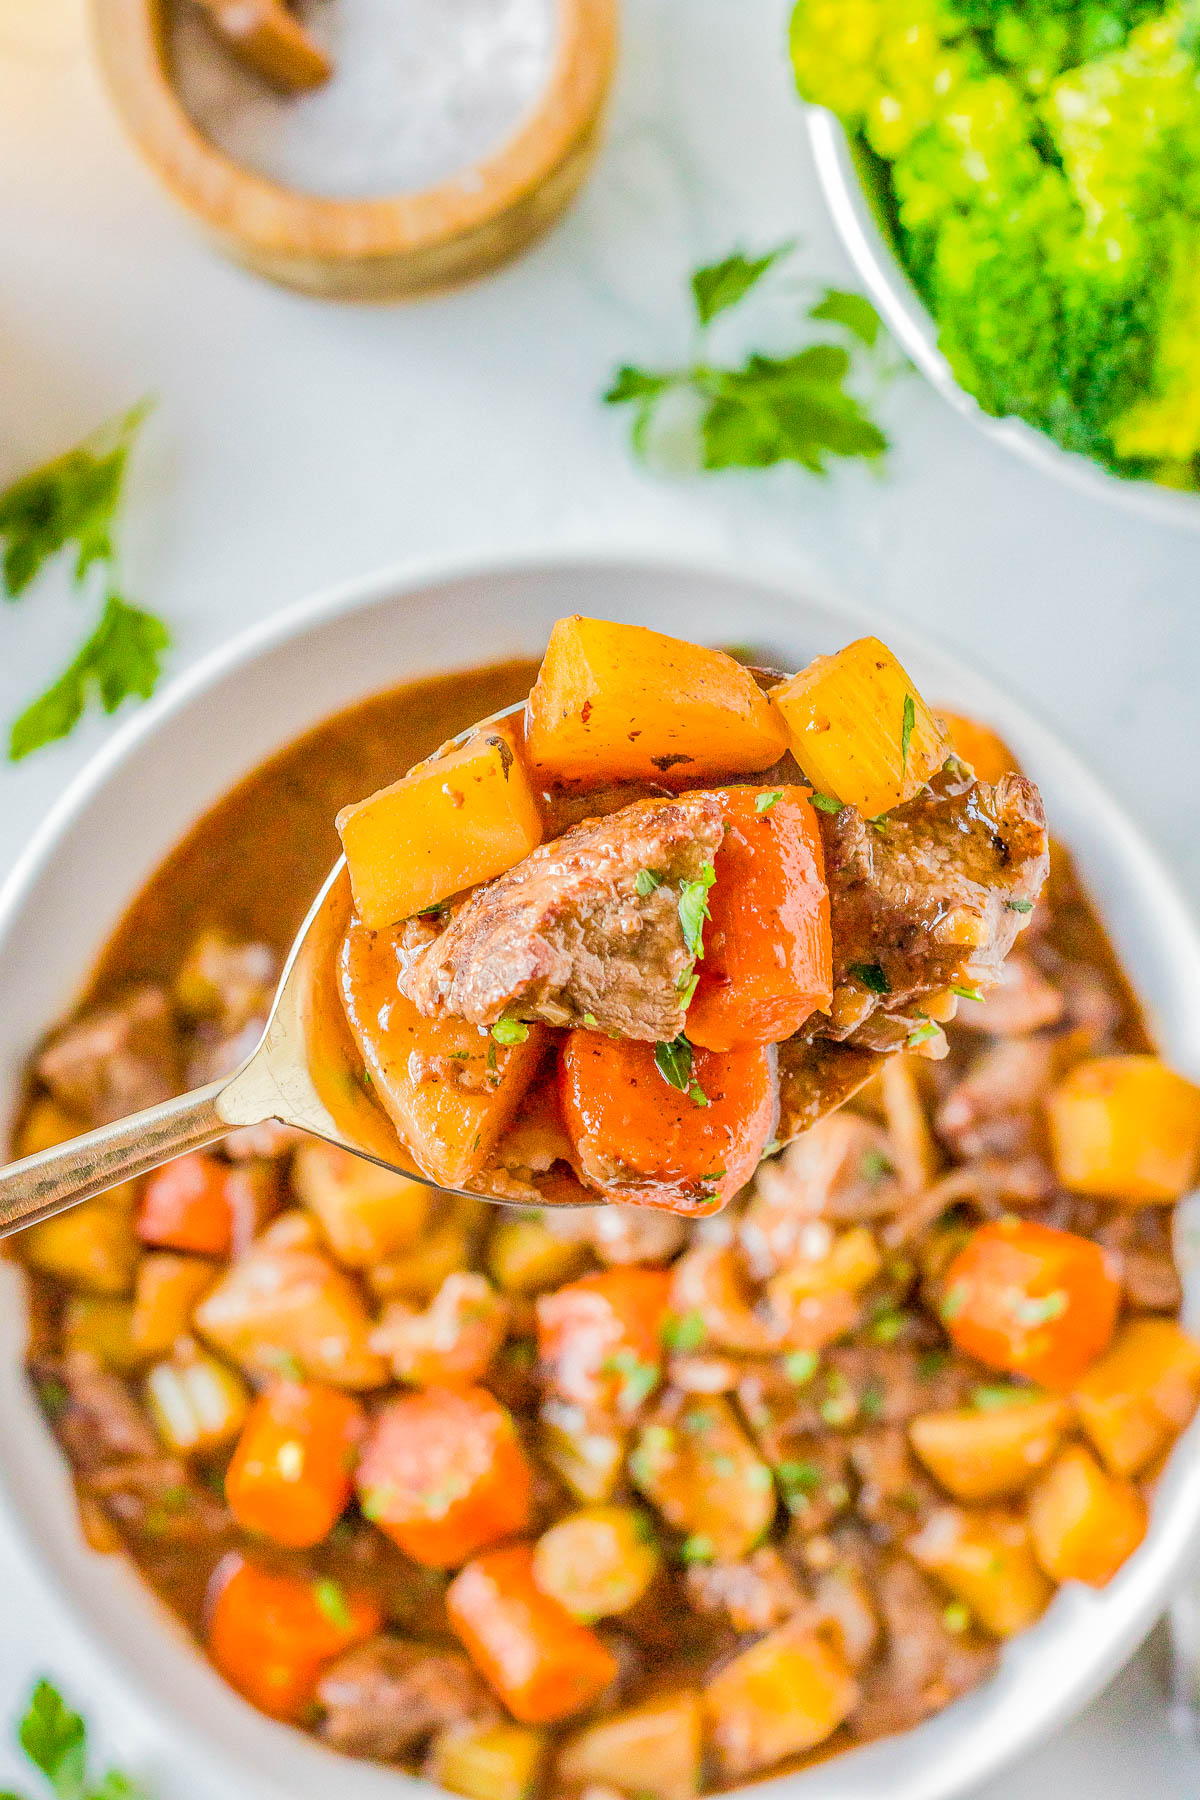 Old-Fashioned Beef Stew — A EASY stovetop recipe that features succulent pieces of beef with tender carrots and potatoes, all coated in a rich gravy! Make this COMFORT FOOD classic all winter long. It’s a simple recipe with minimal ingredients and very little hands on prep that the whole family will adore!